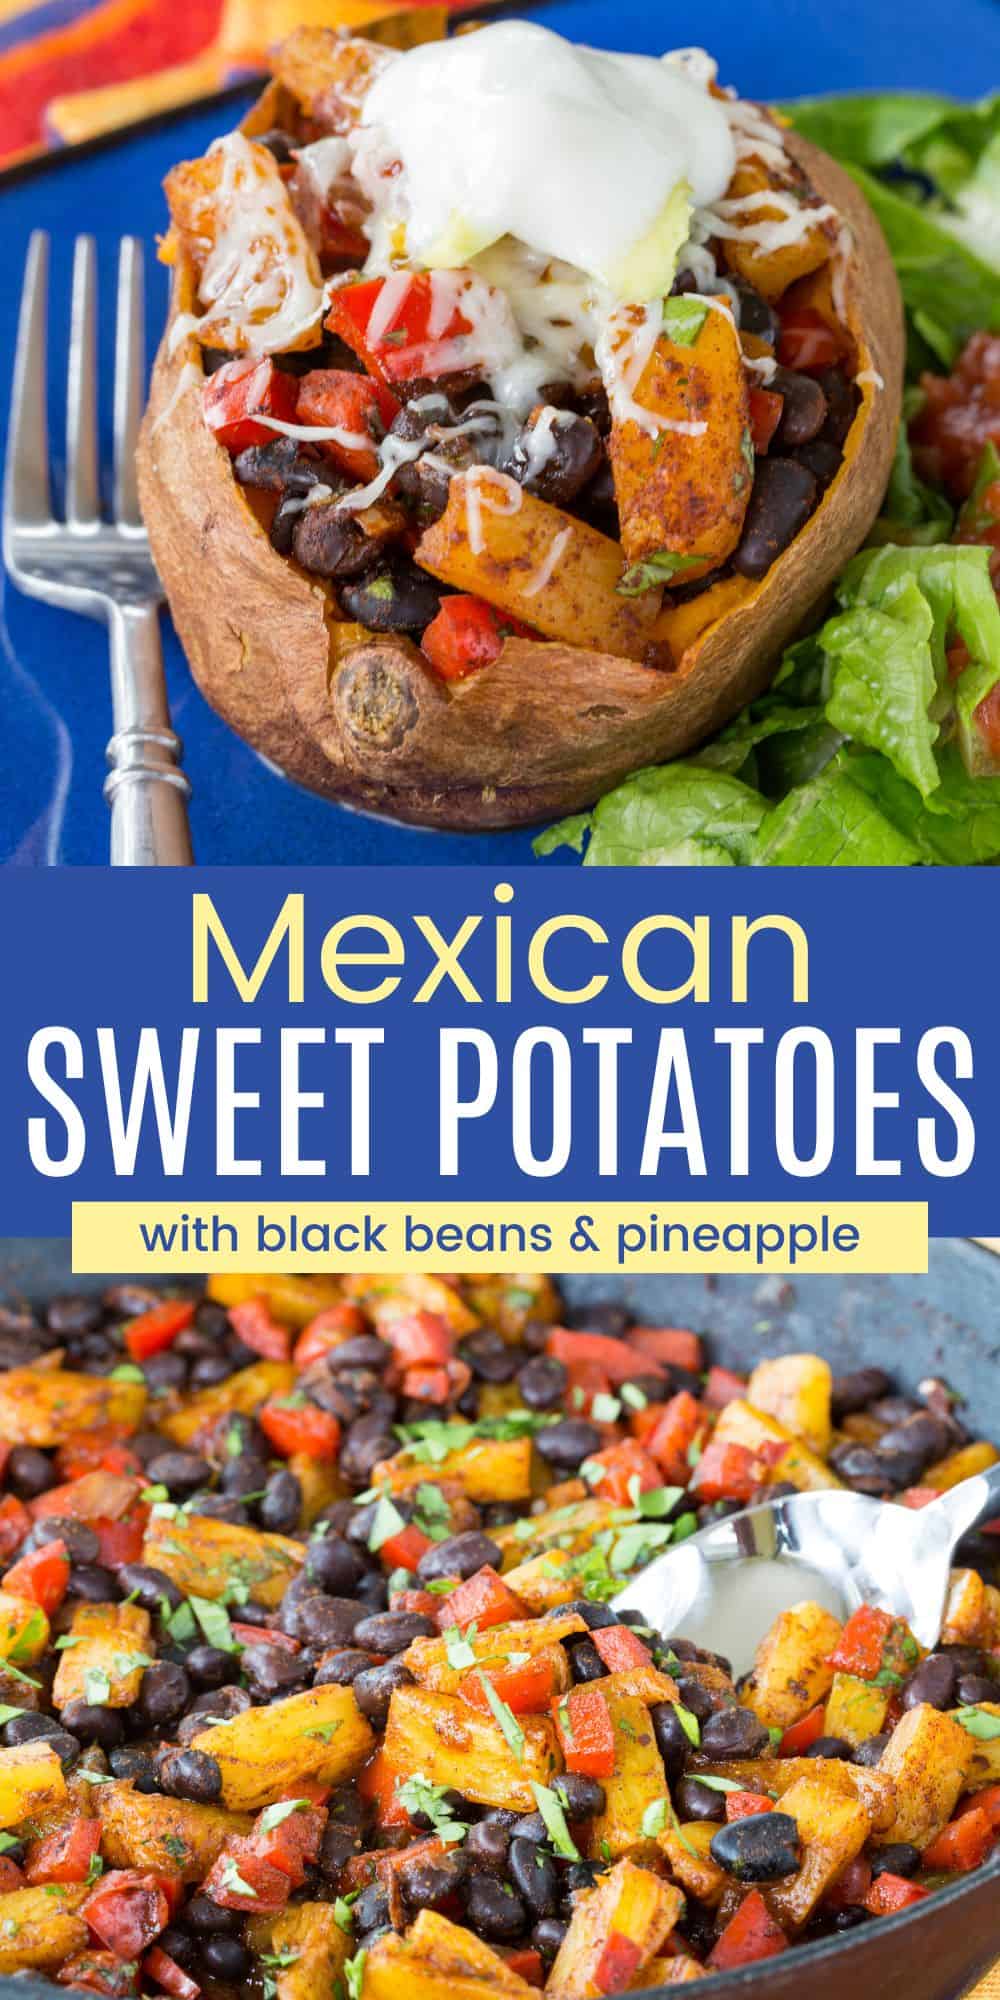 Mexican Pineapple Black Bean Stuffed Baked Sweet Potatoes - a healthy, meatless, gluten-free dinner, perfect for Cinco de Mayo! {vegan option}